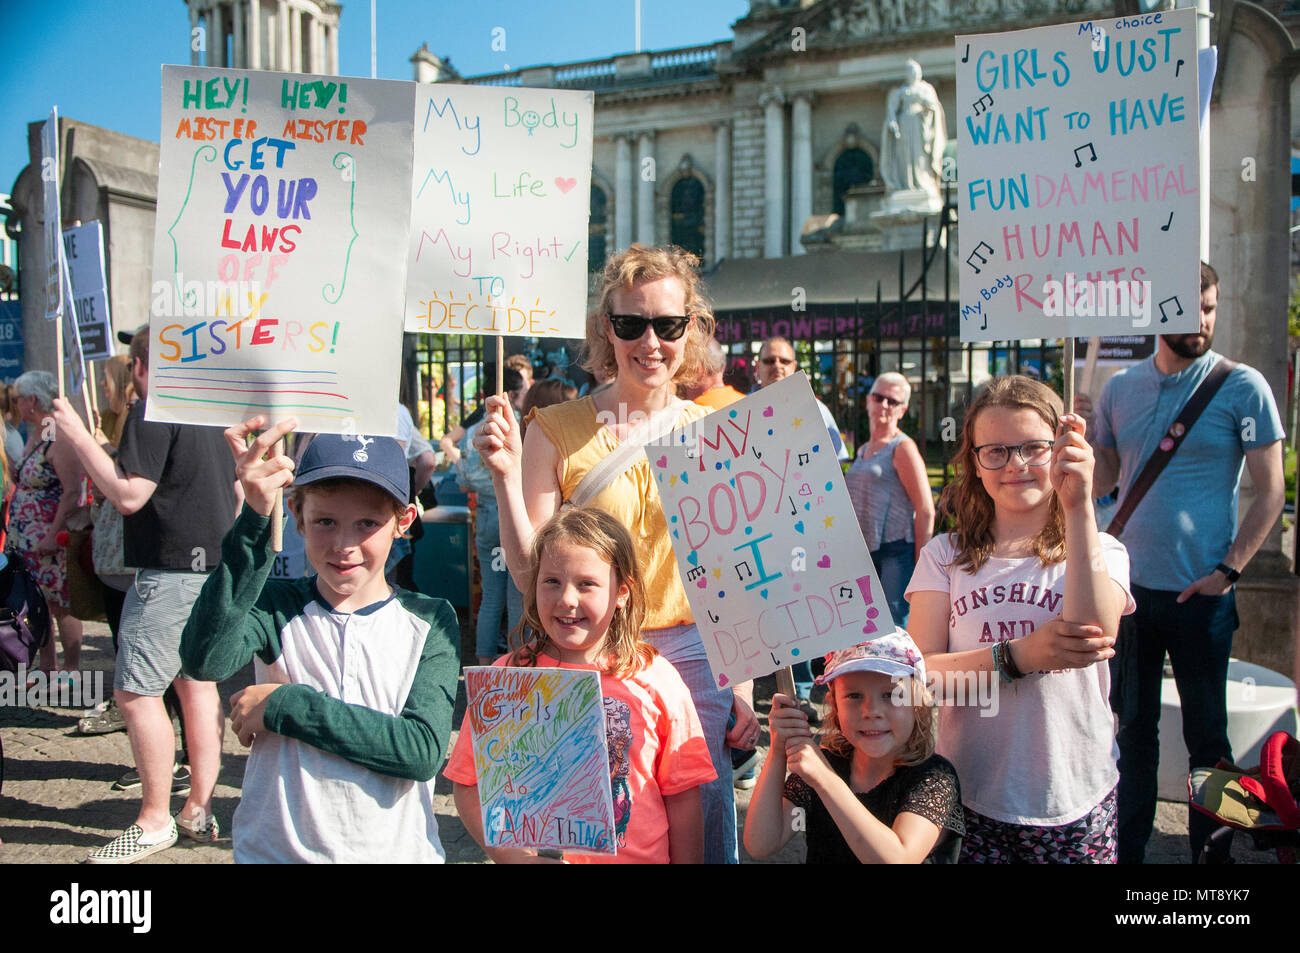 Belfast, Northern Ireland. 28/05/2018 - A mother and four children hold placards supporting the right to choose.  Around 500 people gather at Belfast City Hall to call for the decriminalisation of abortion in Northern Ireland.  It comes the day after a referendum held in the Republic of Ireland returned a substantial 'Yes' to removing the 8th amendment to the constitution, which gives equal right of life to both the mother and baby, effectively banning abortion in all circumstances. Stock Photo